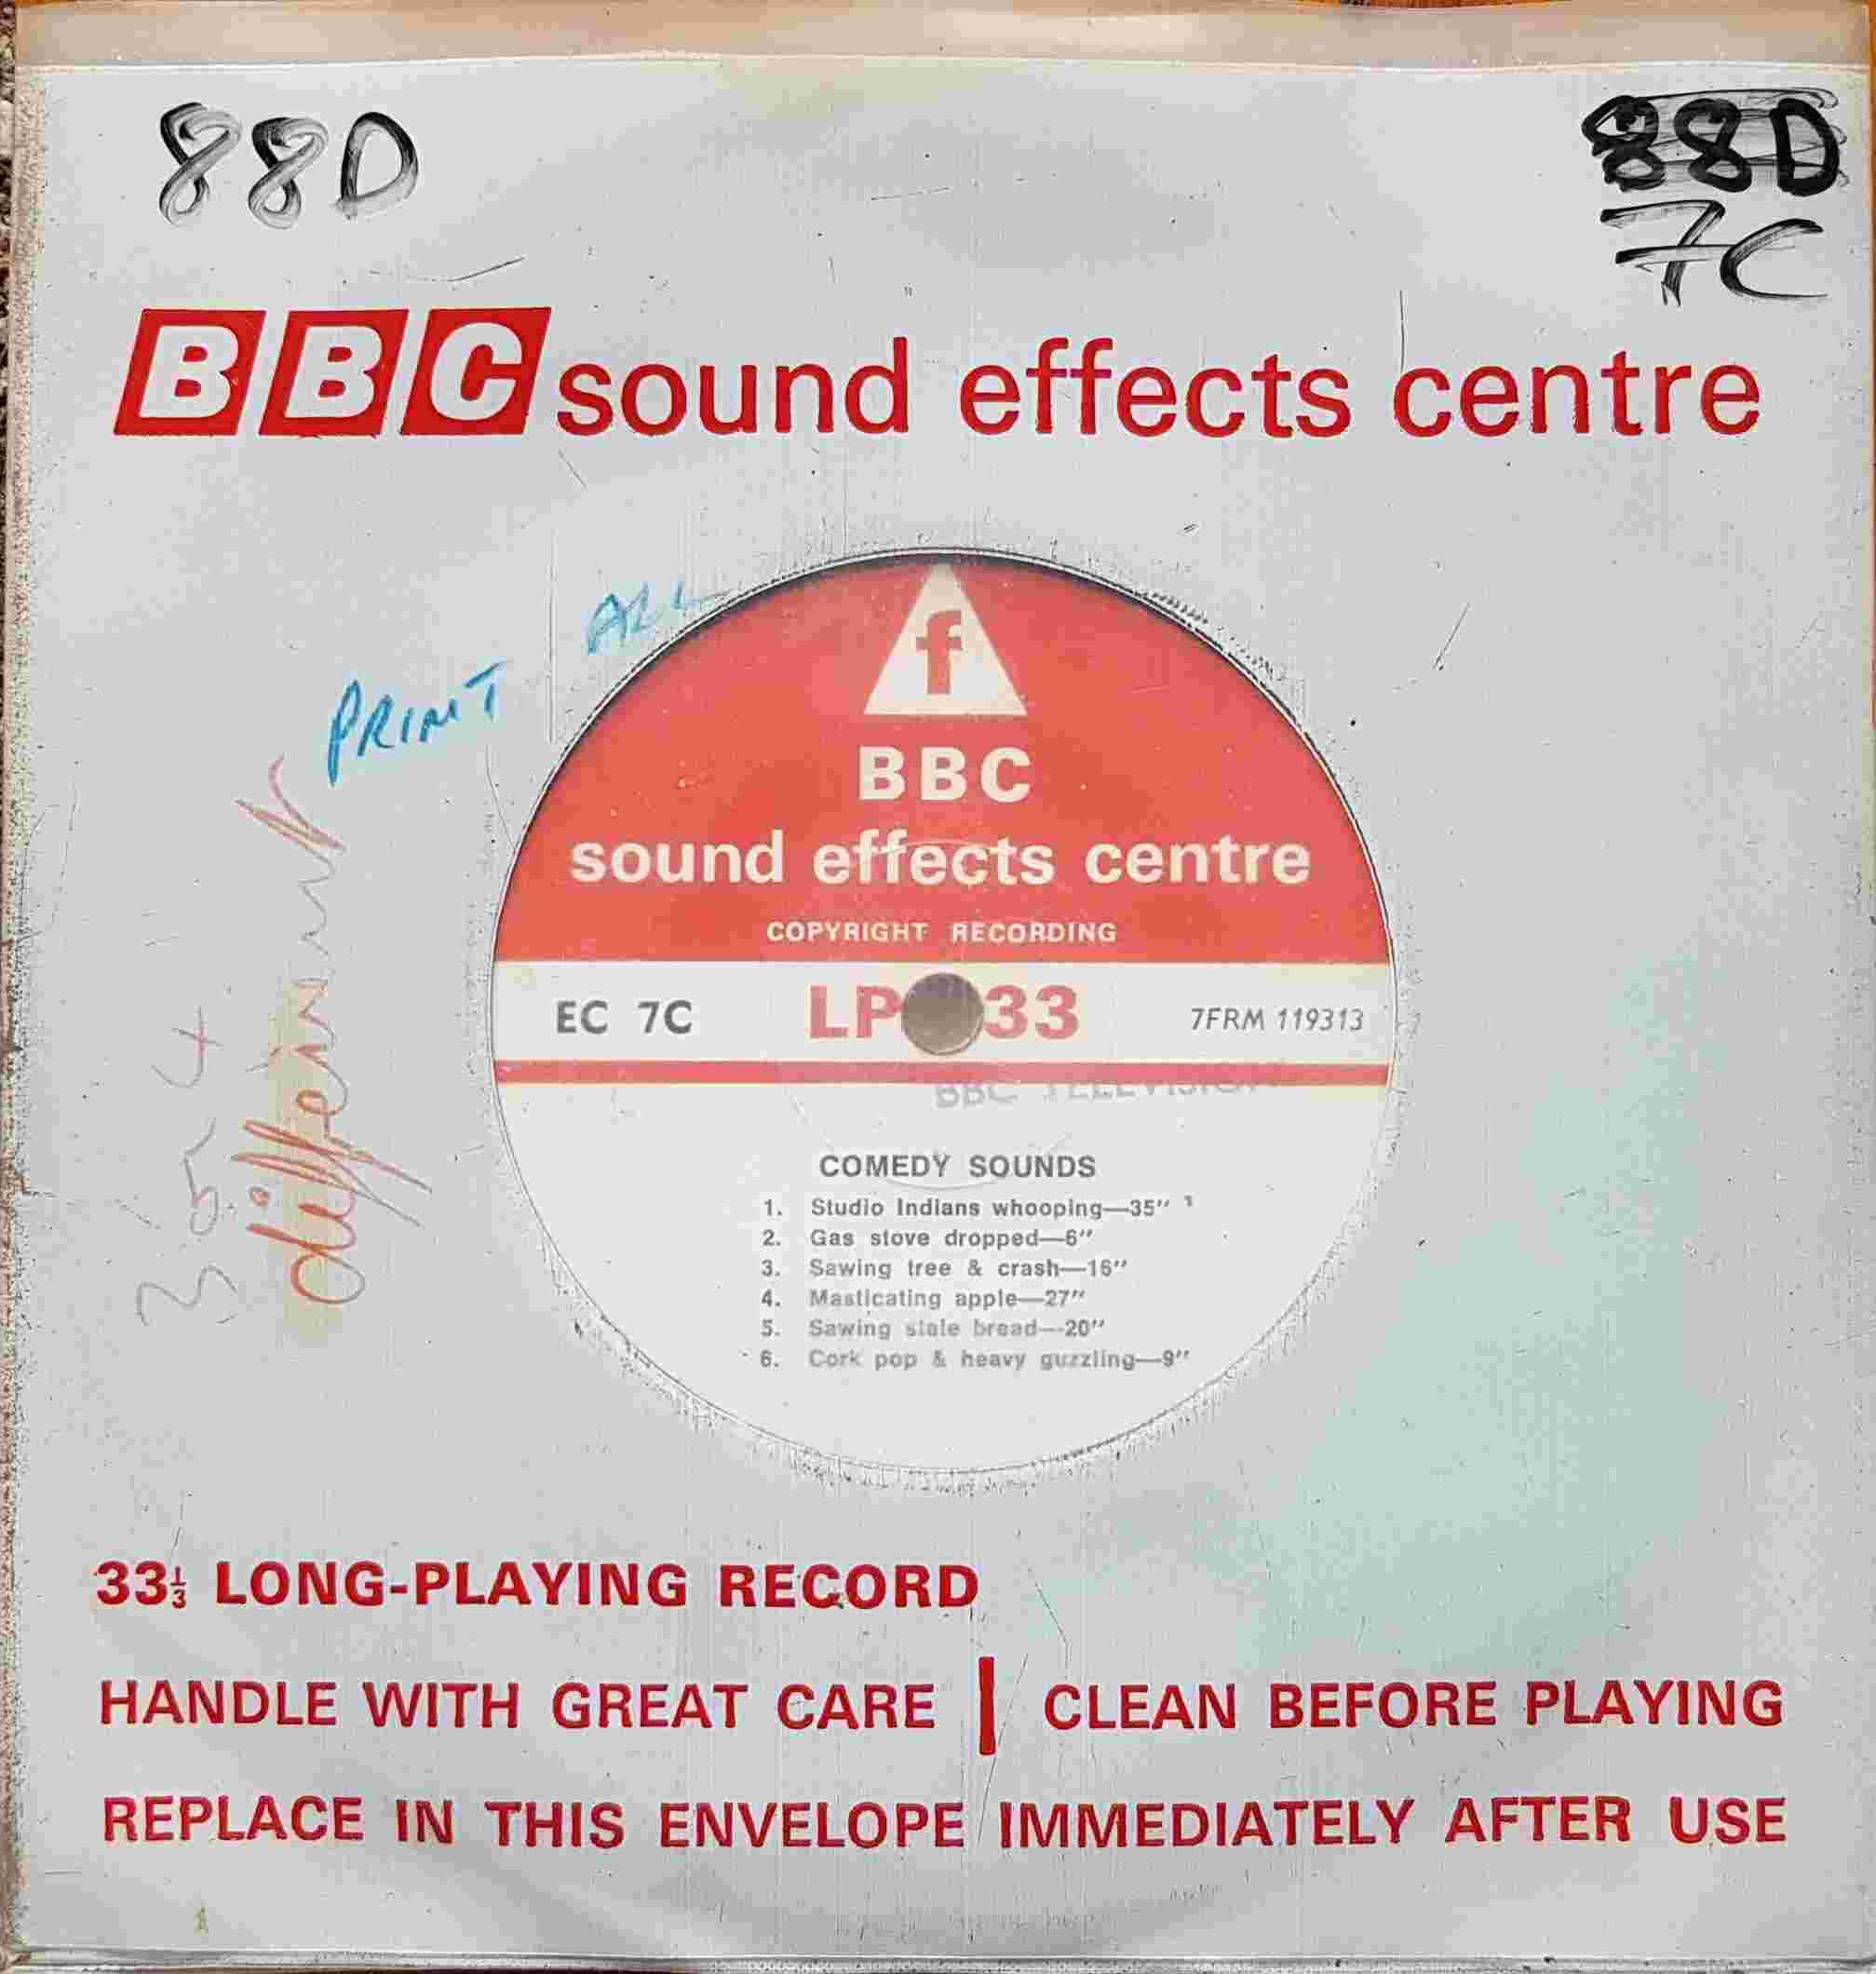 Picture of EC 7C Comedy sounds by artist Not registered from the BBC records and Tapes library